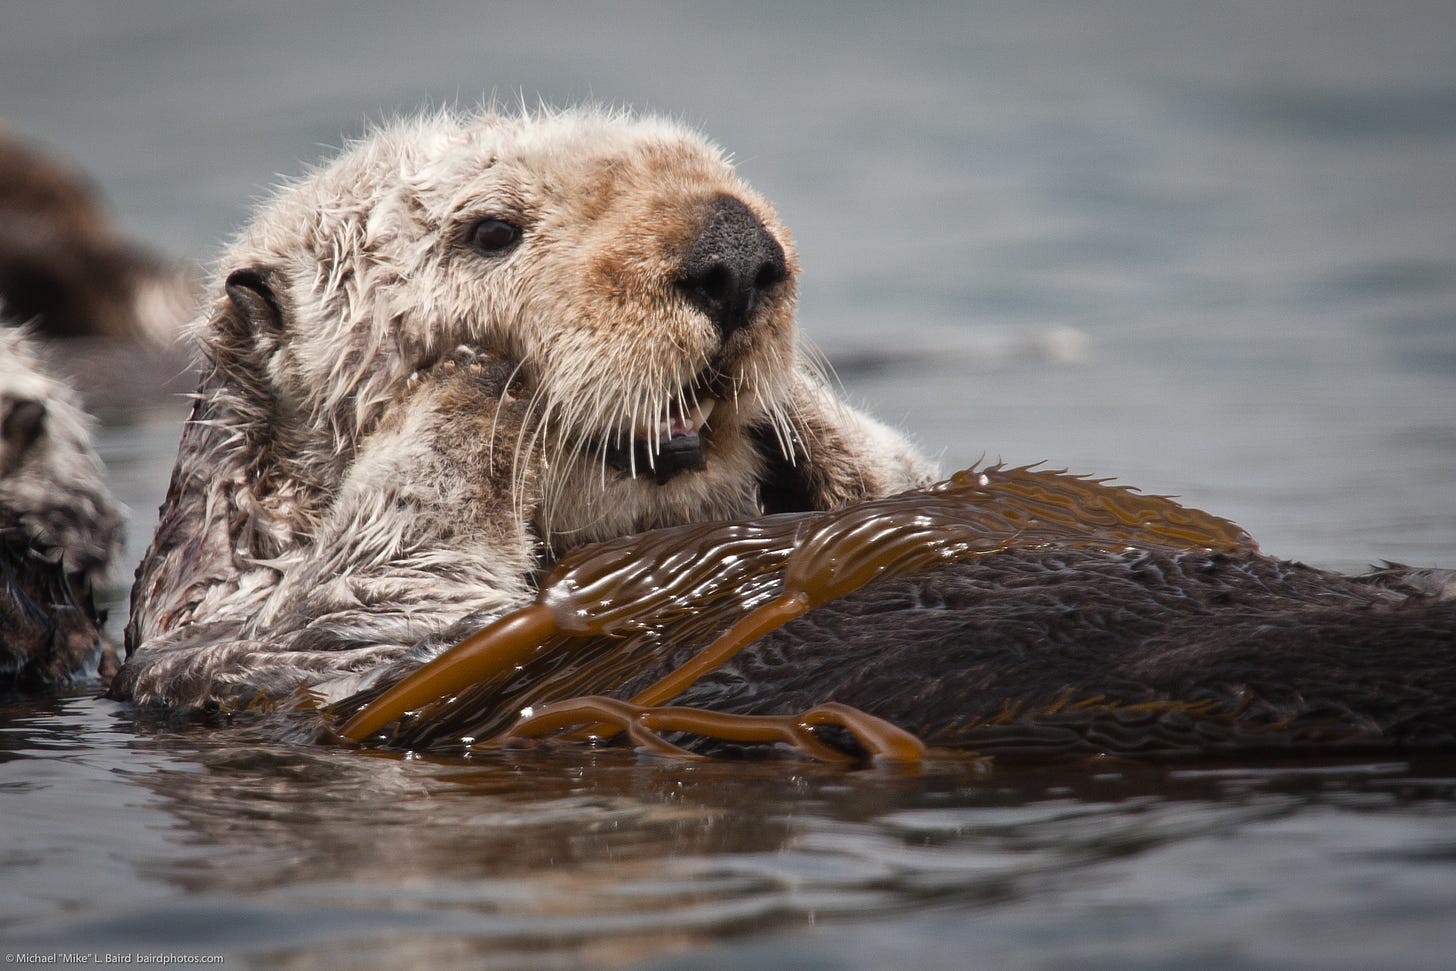 A sea otter in a sit-up position in the sea, with some kelp on its belly, and its front paws holding its cheeks.